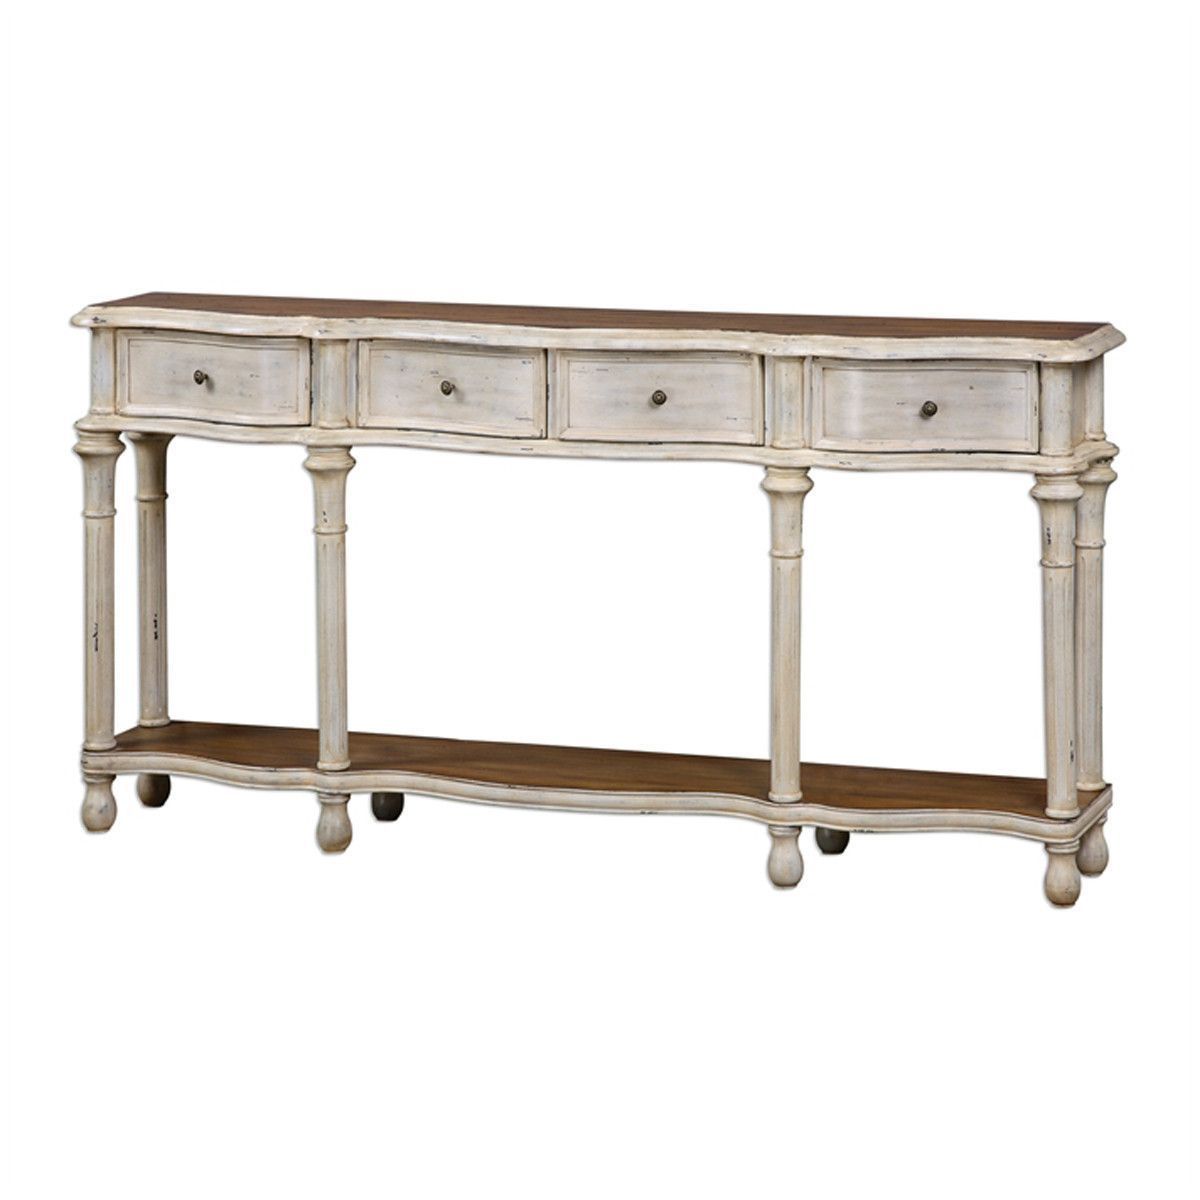 Uttermost Gaultier Distressed Off White Console Table | White Inside Antique White Distressed Console Tables (View 10 of 30)